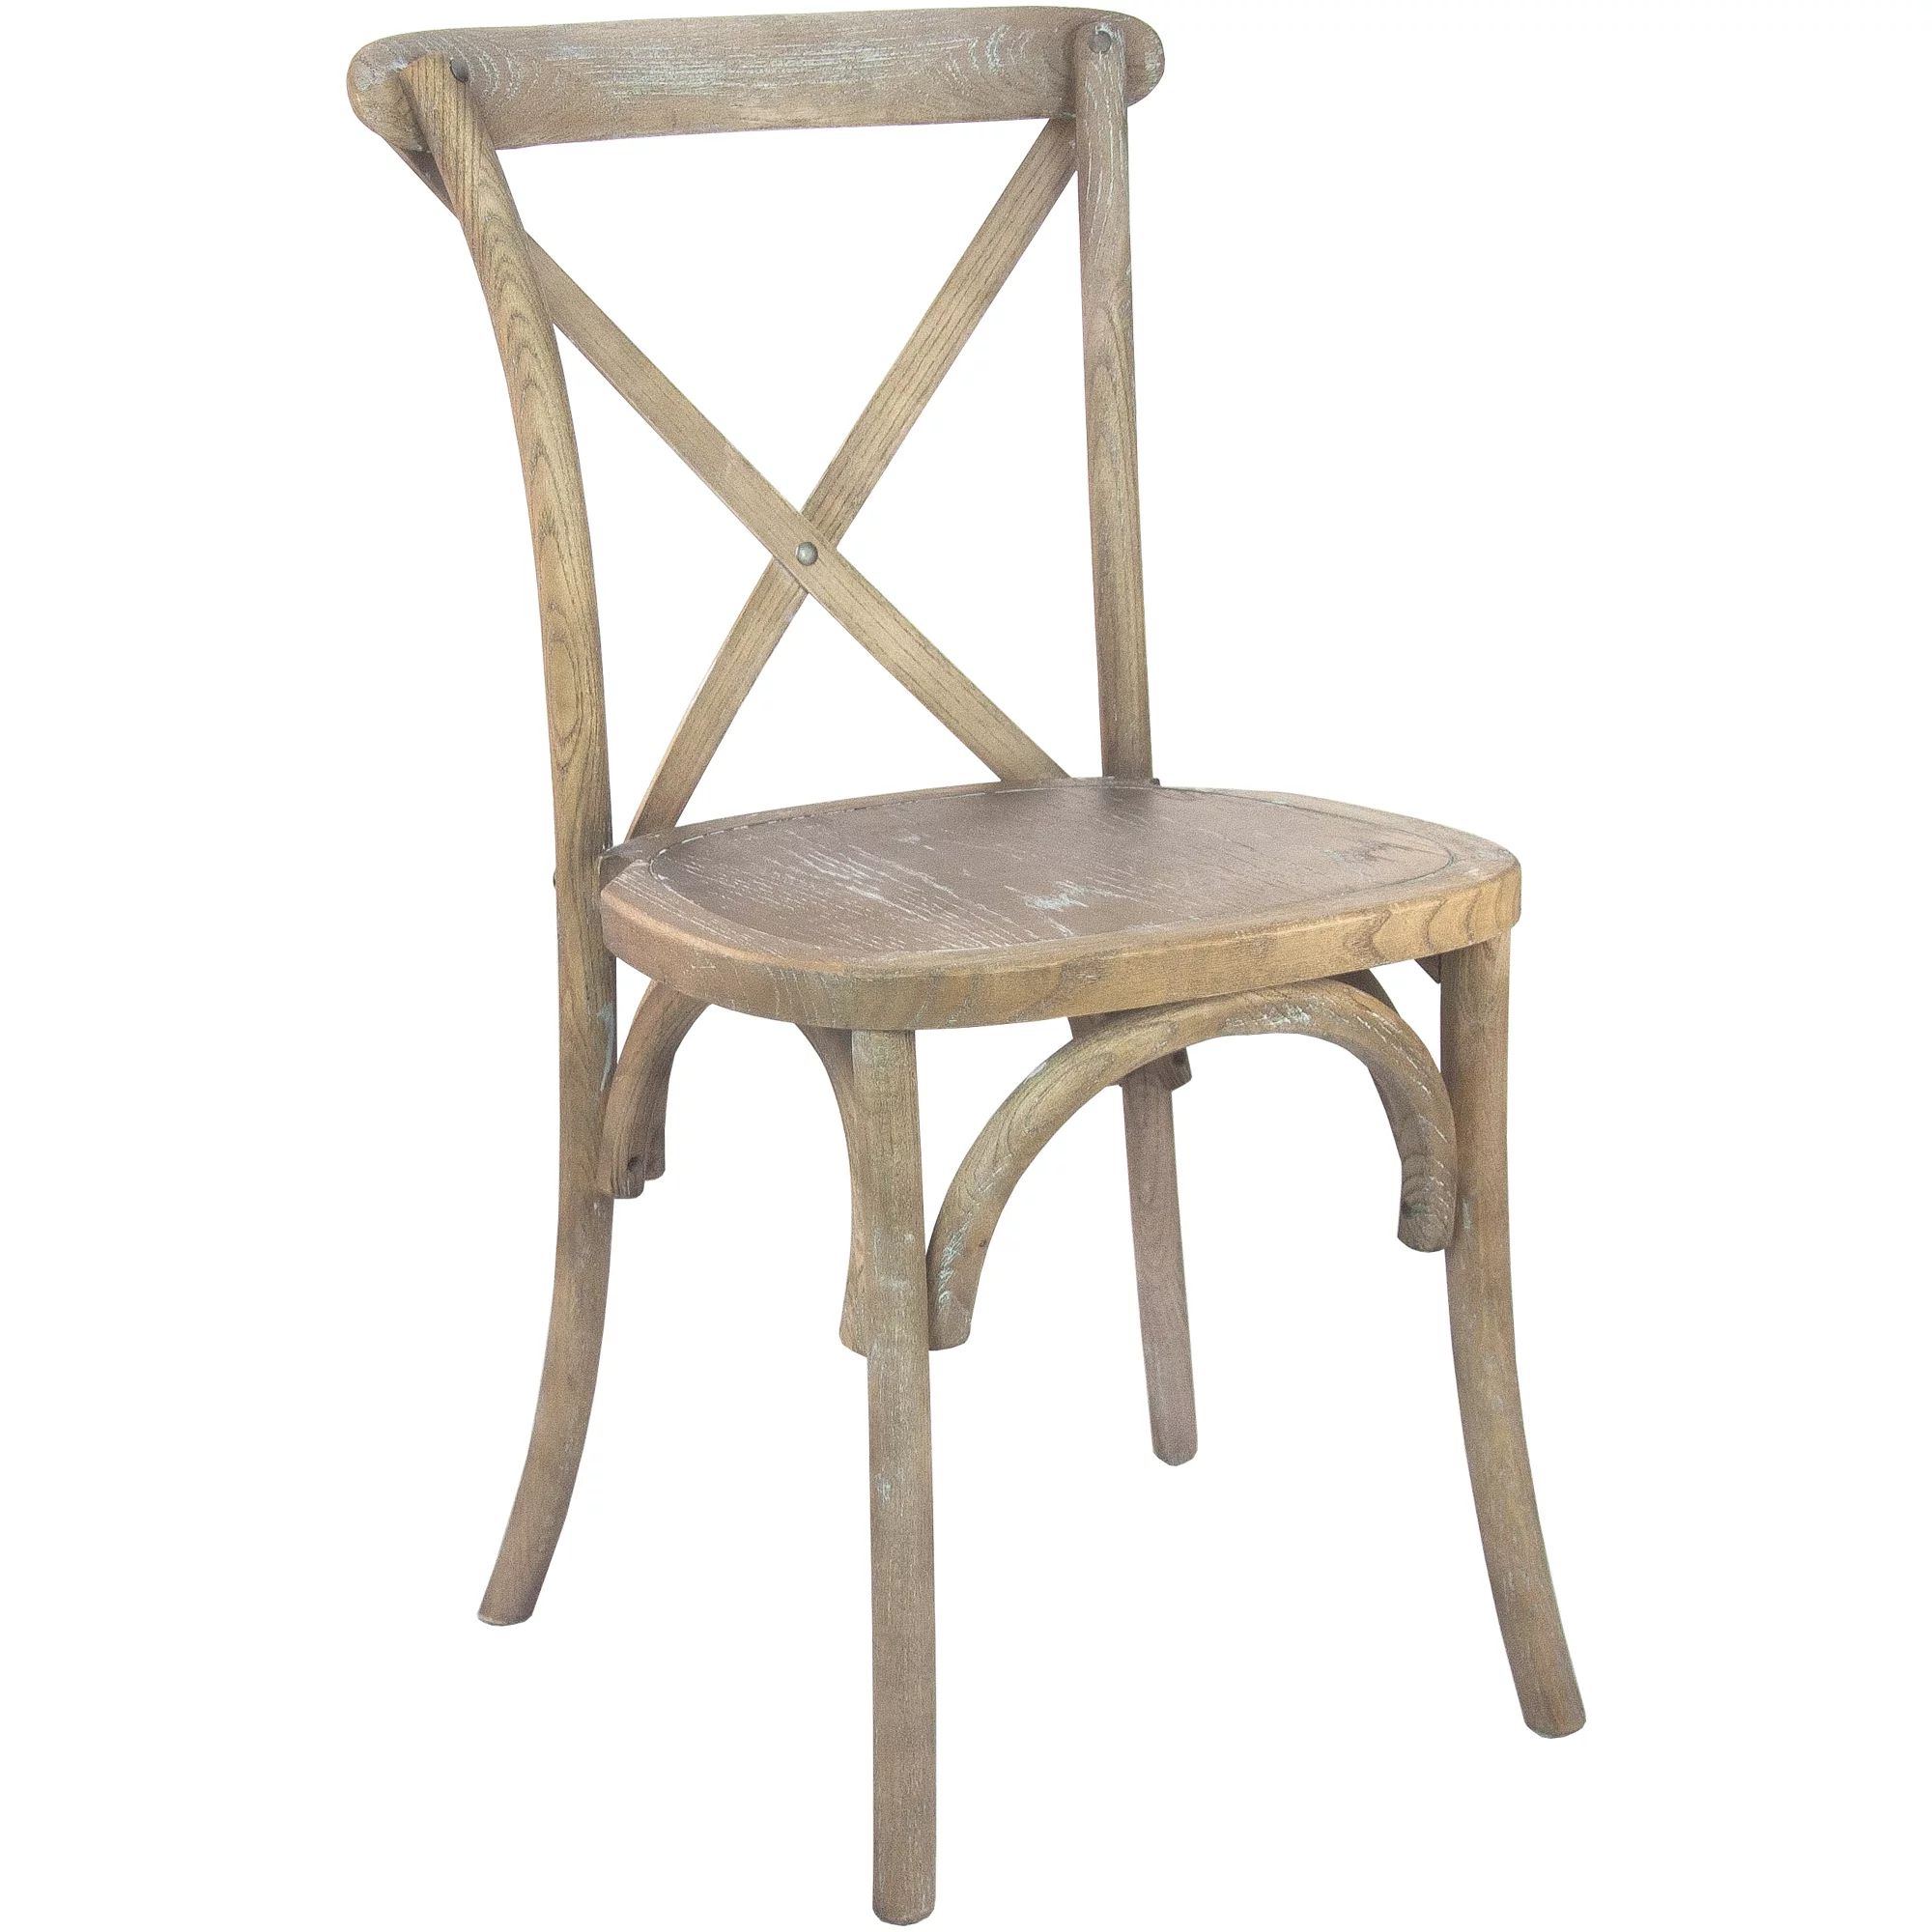 Advantage Series Wooden X-back Chair, Multiple Finishes | Walmart (US)